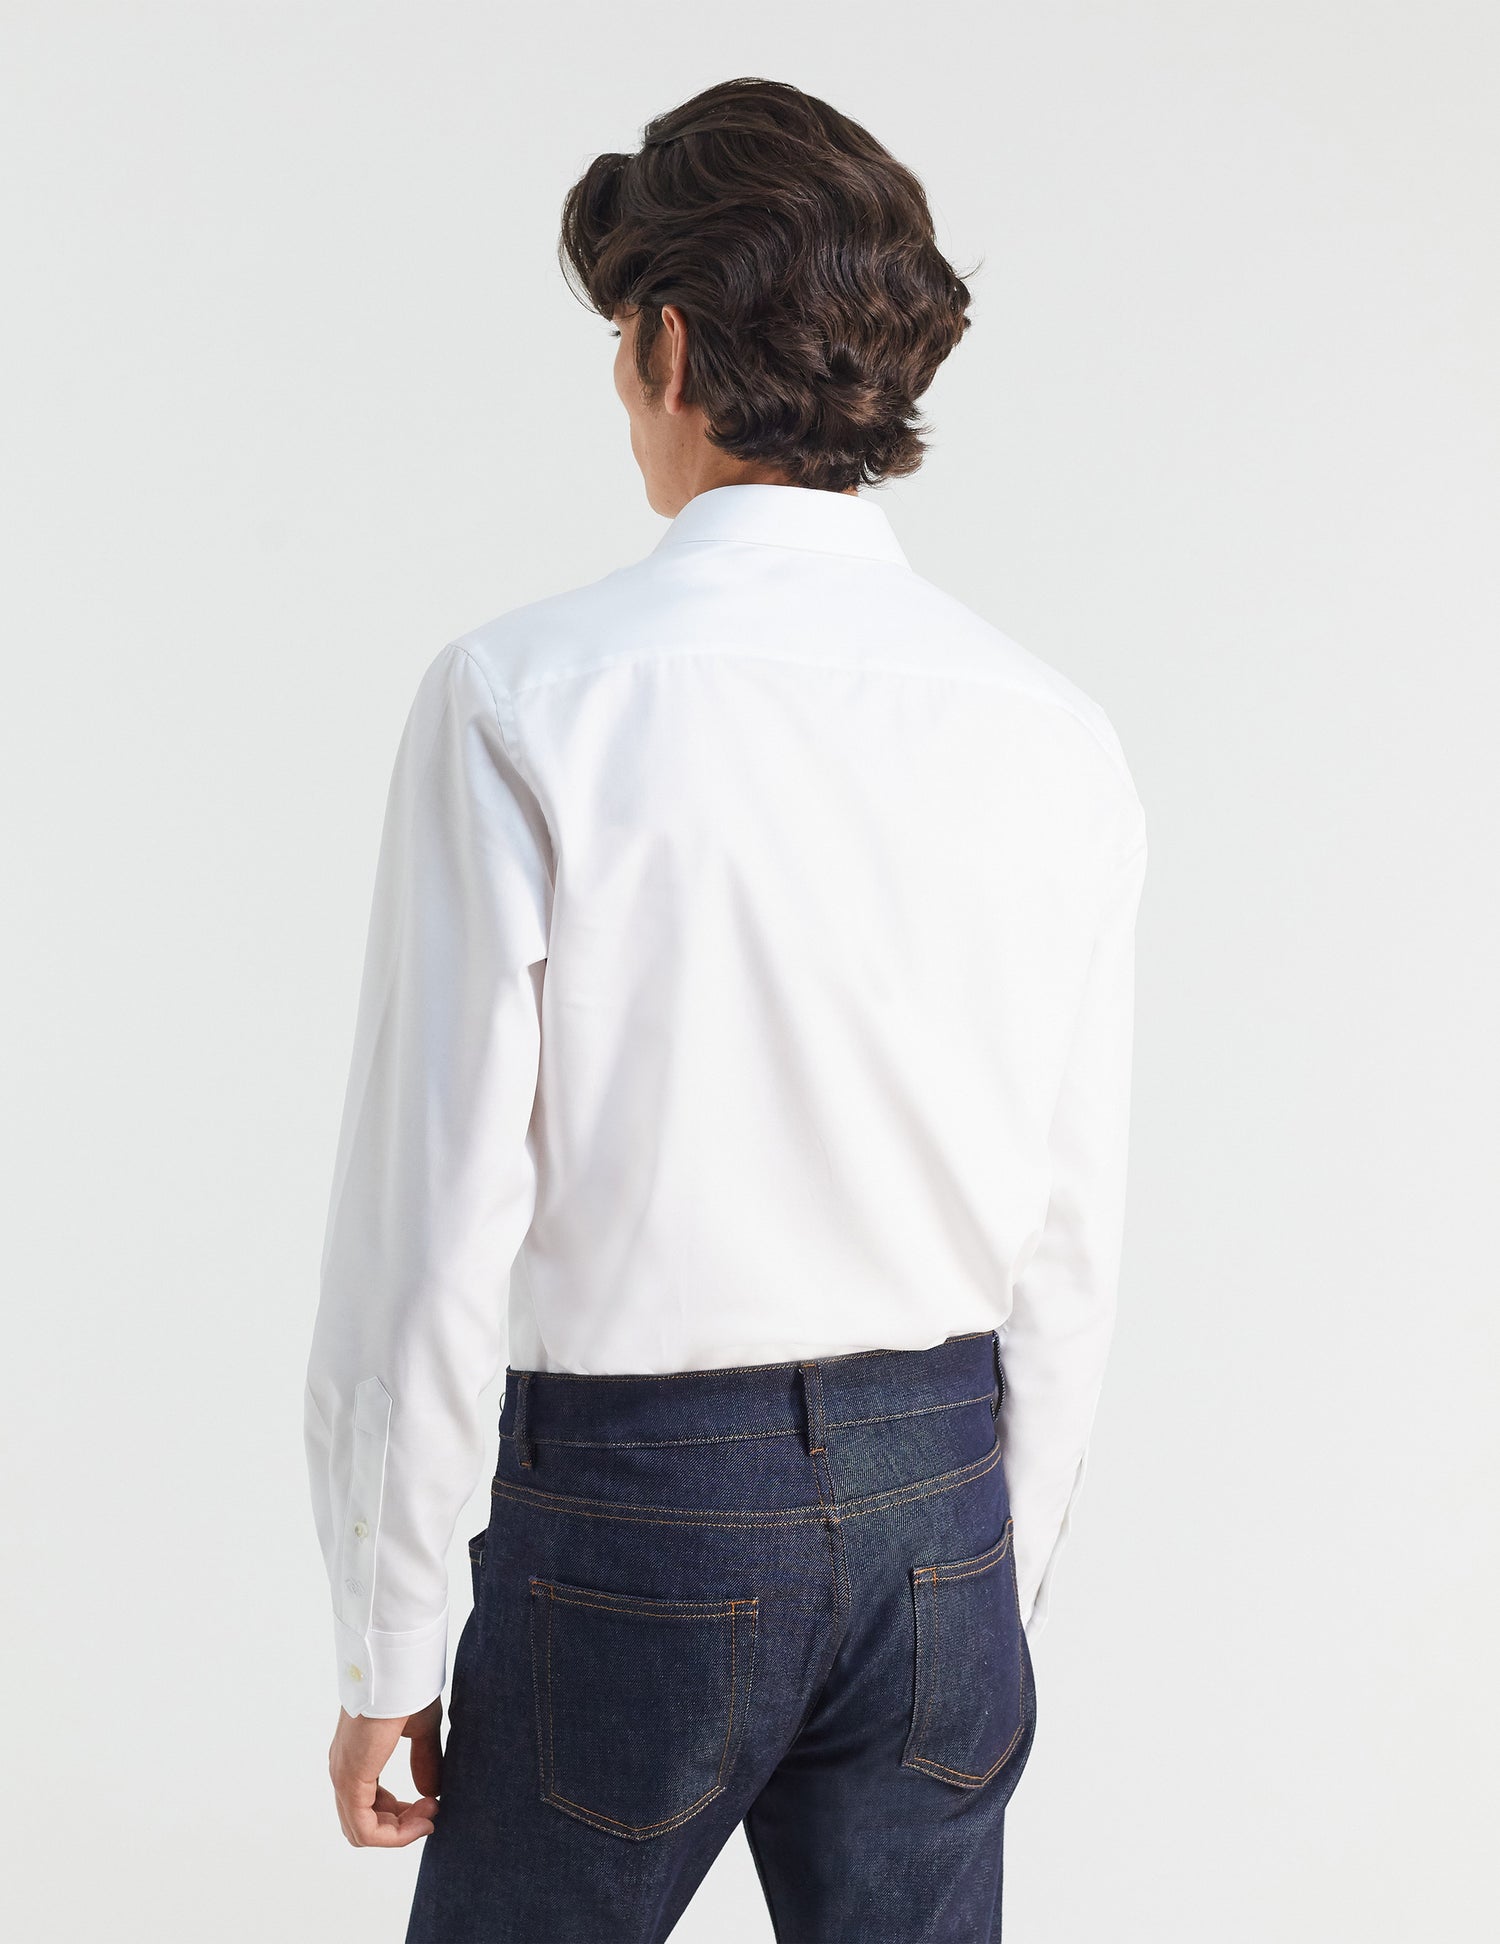 Fitted white shirt - Fashioned - Figaret Collar#4